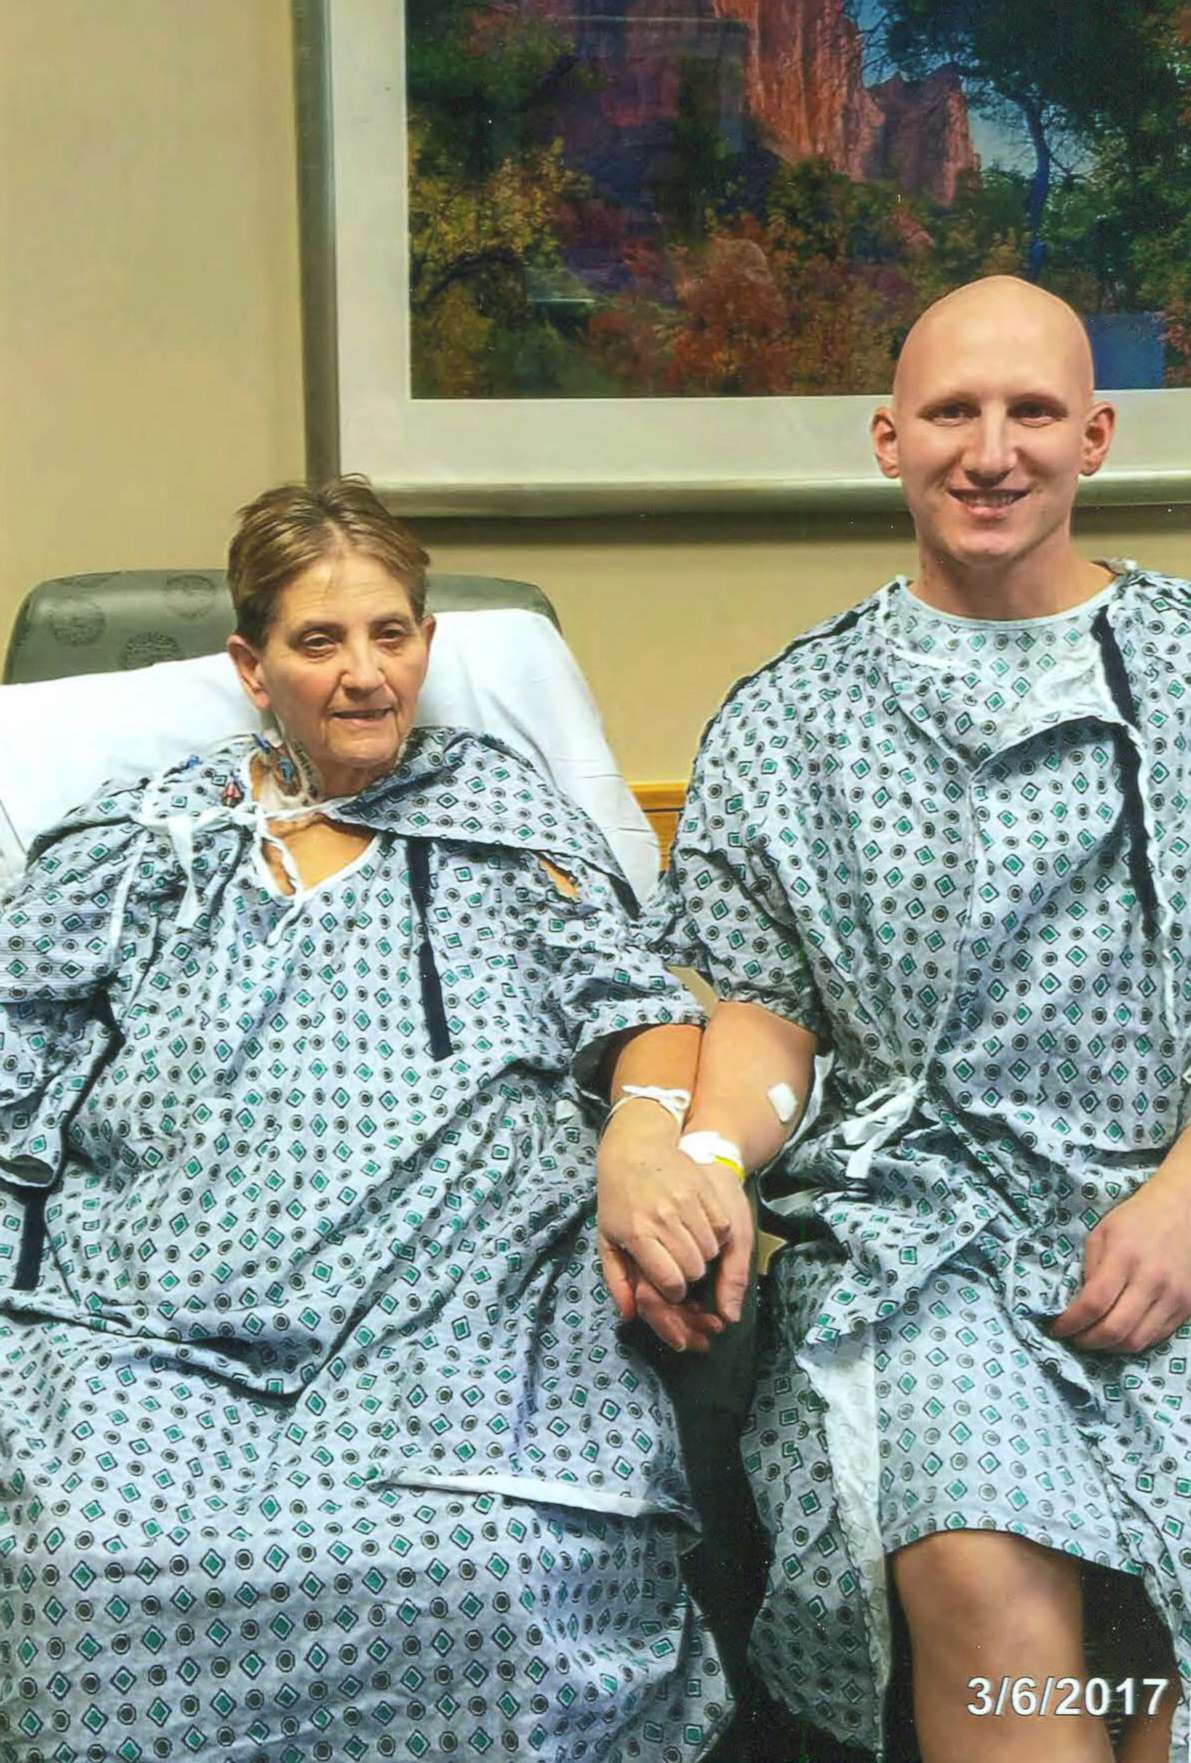 PHOTO: Brian and Diane Muscarella visit UPMC's Thomas E. Starzl Transplantation Institute a year after their transplant surgery, which took place in 2017. 